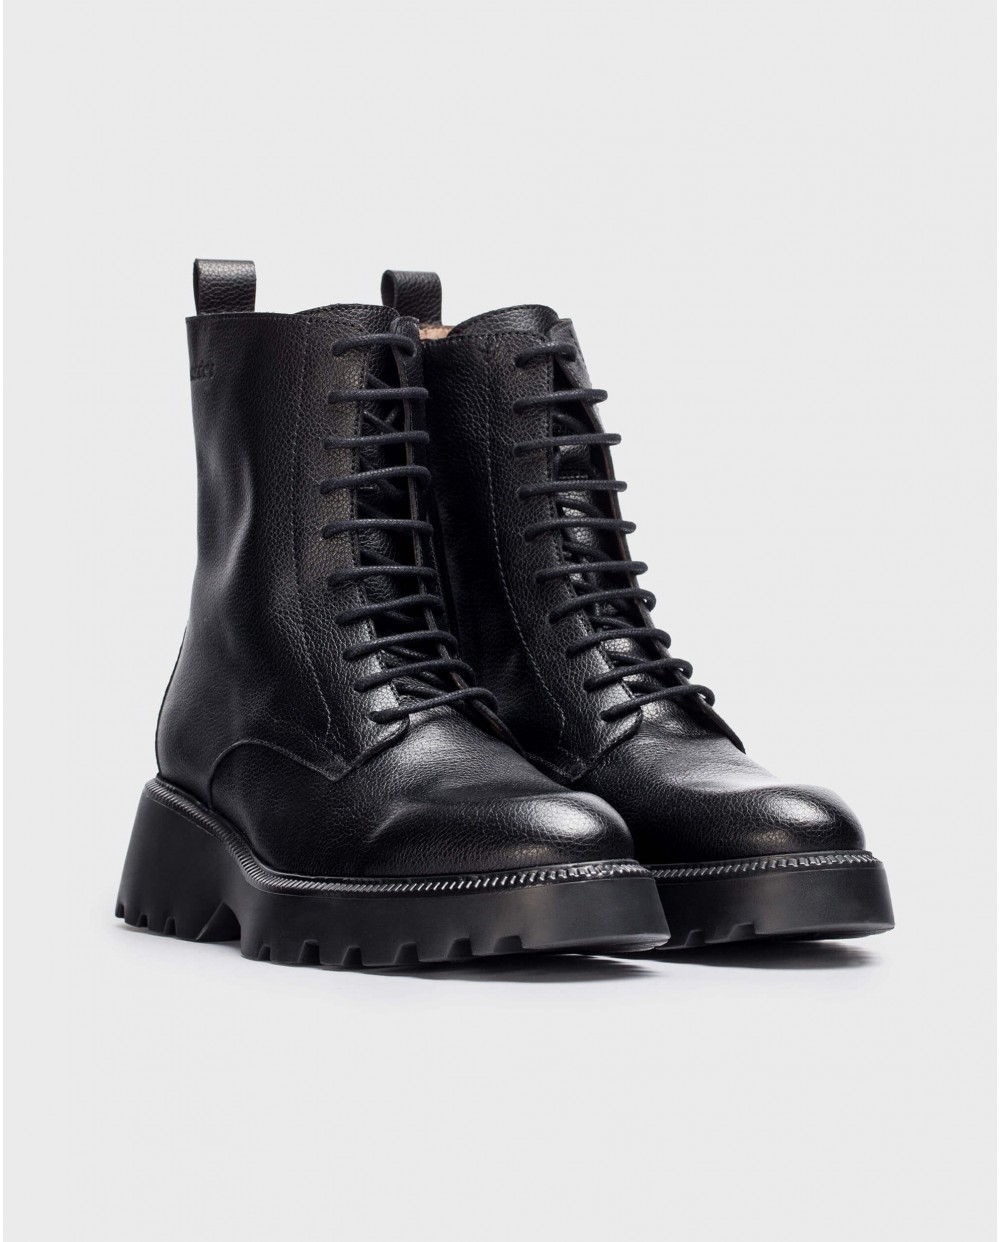 Wonders-Ankle Boots-Black leather ATARI ankle boot